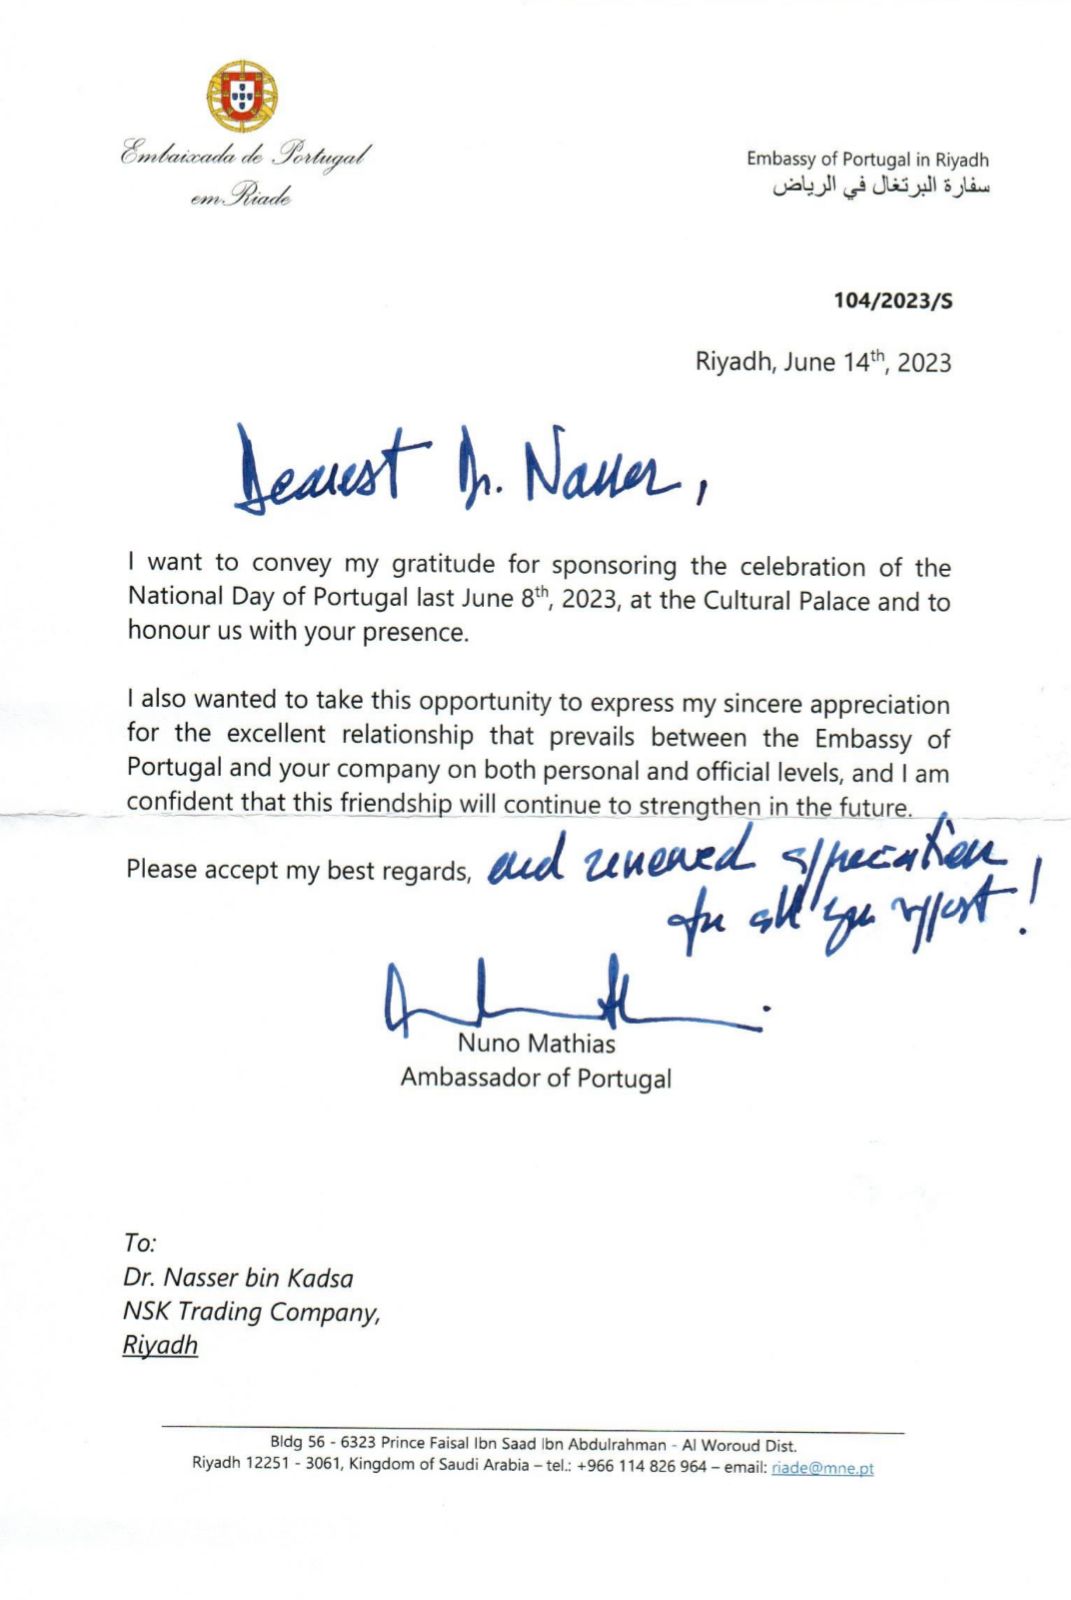 Appreciation Letter From His Excellency The Ambassador of Portugal